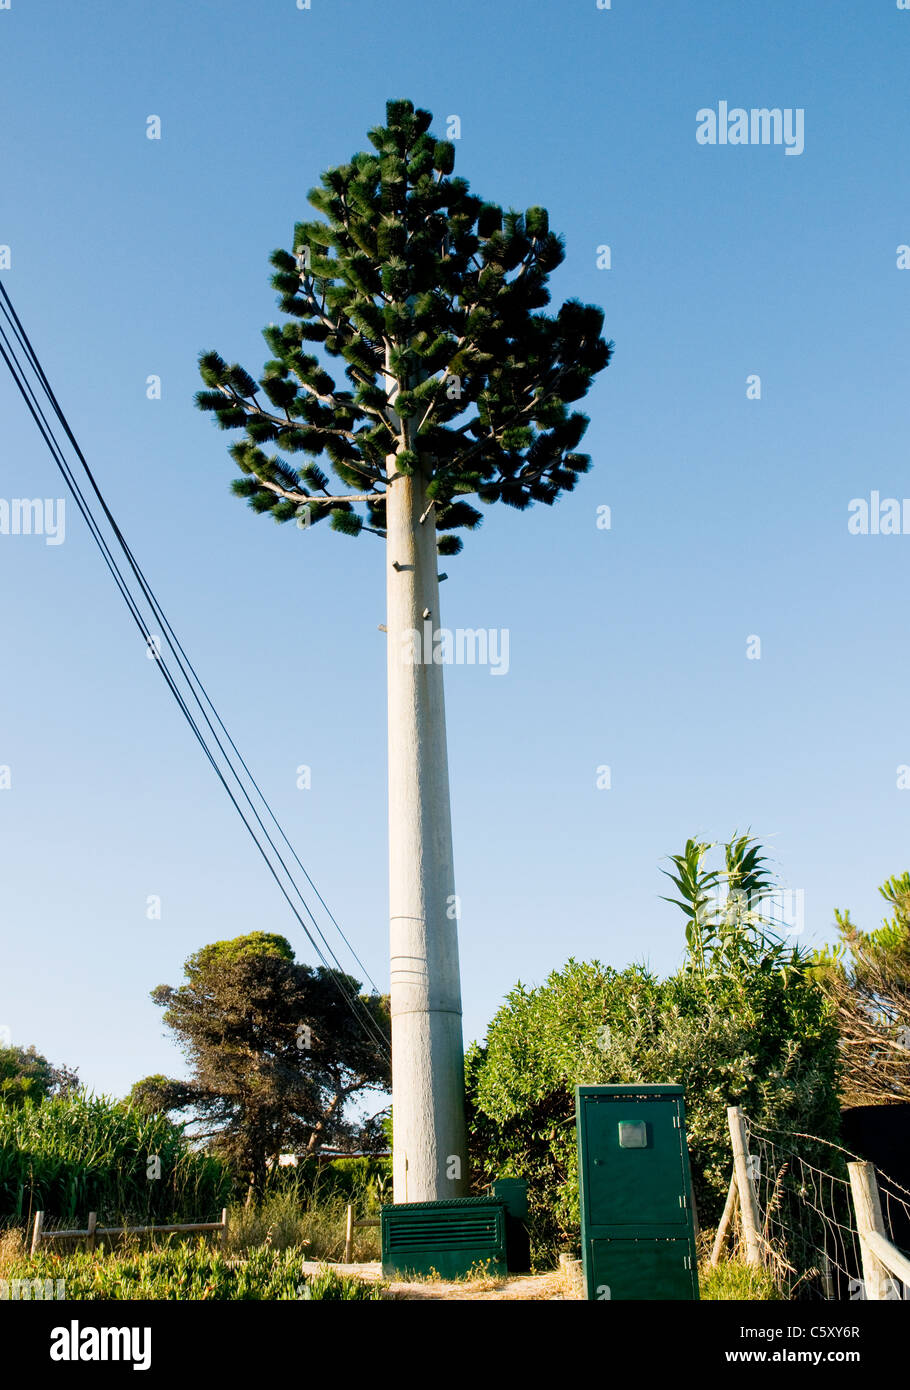 A telecommunications mast disguised as a tree Stock Photo